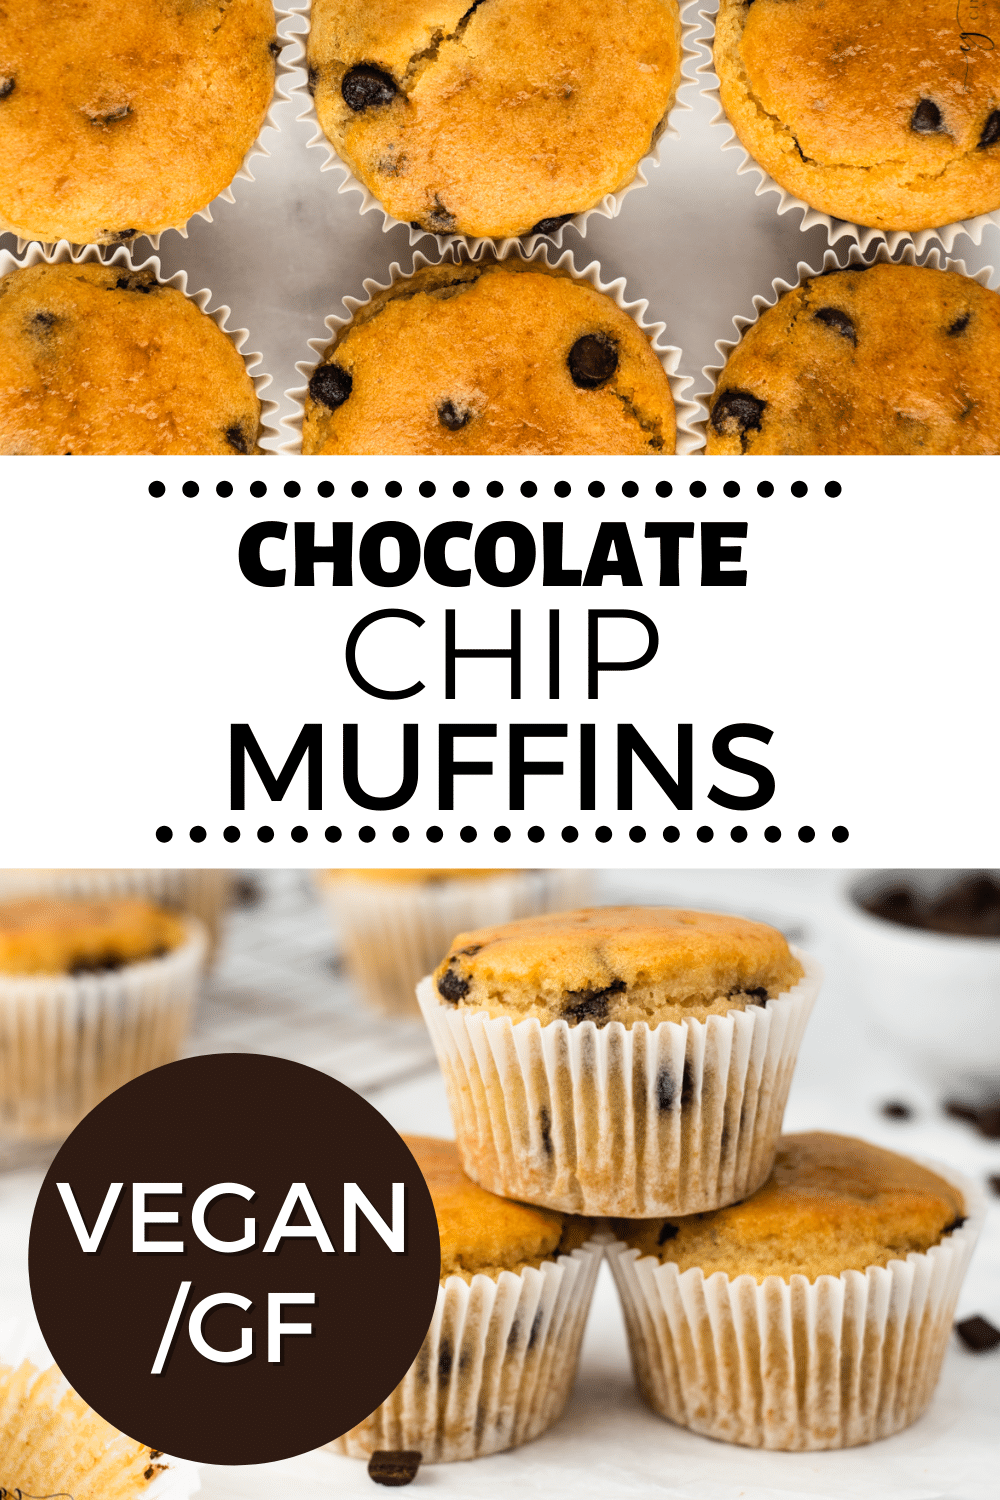 Vegan Chocolate Chip Muffins are the slightly sweet breakfast treat you need! These gluten-free muffins are perfectly moist and super delicious in just half an hour. Perfect for meal prep.